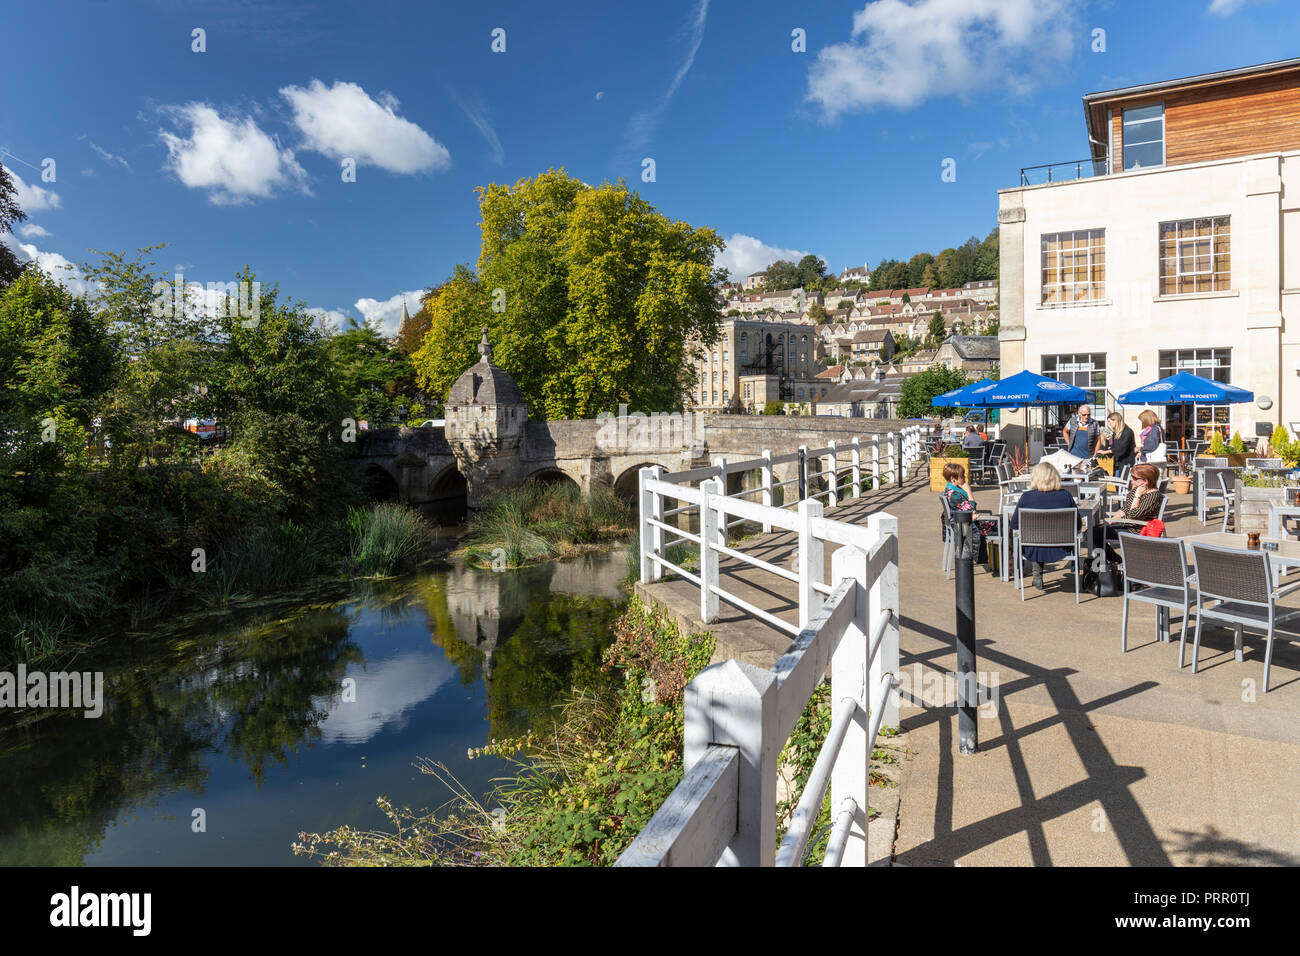 A picturesque view of Bradford on Avon town bridge and The Weaving Shed restaurant, Wiltshire, England, UK Stock Photo